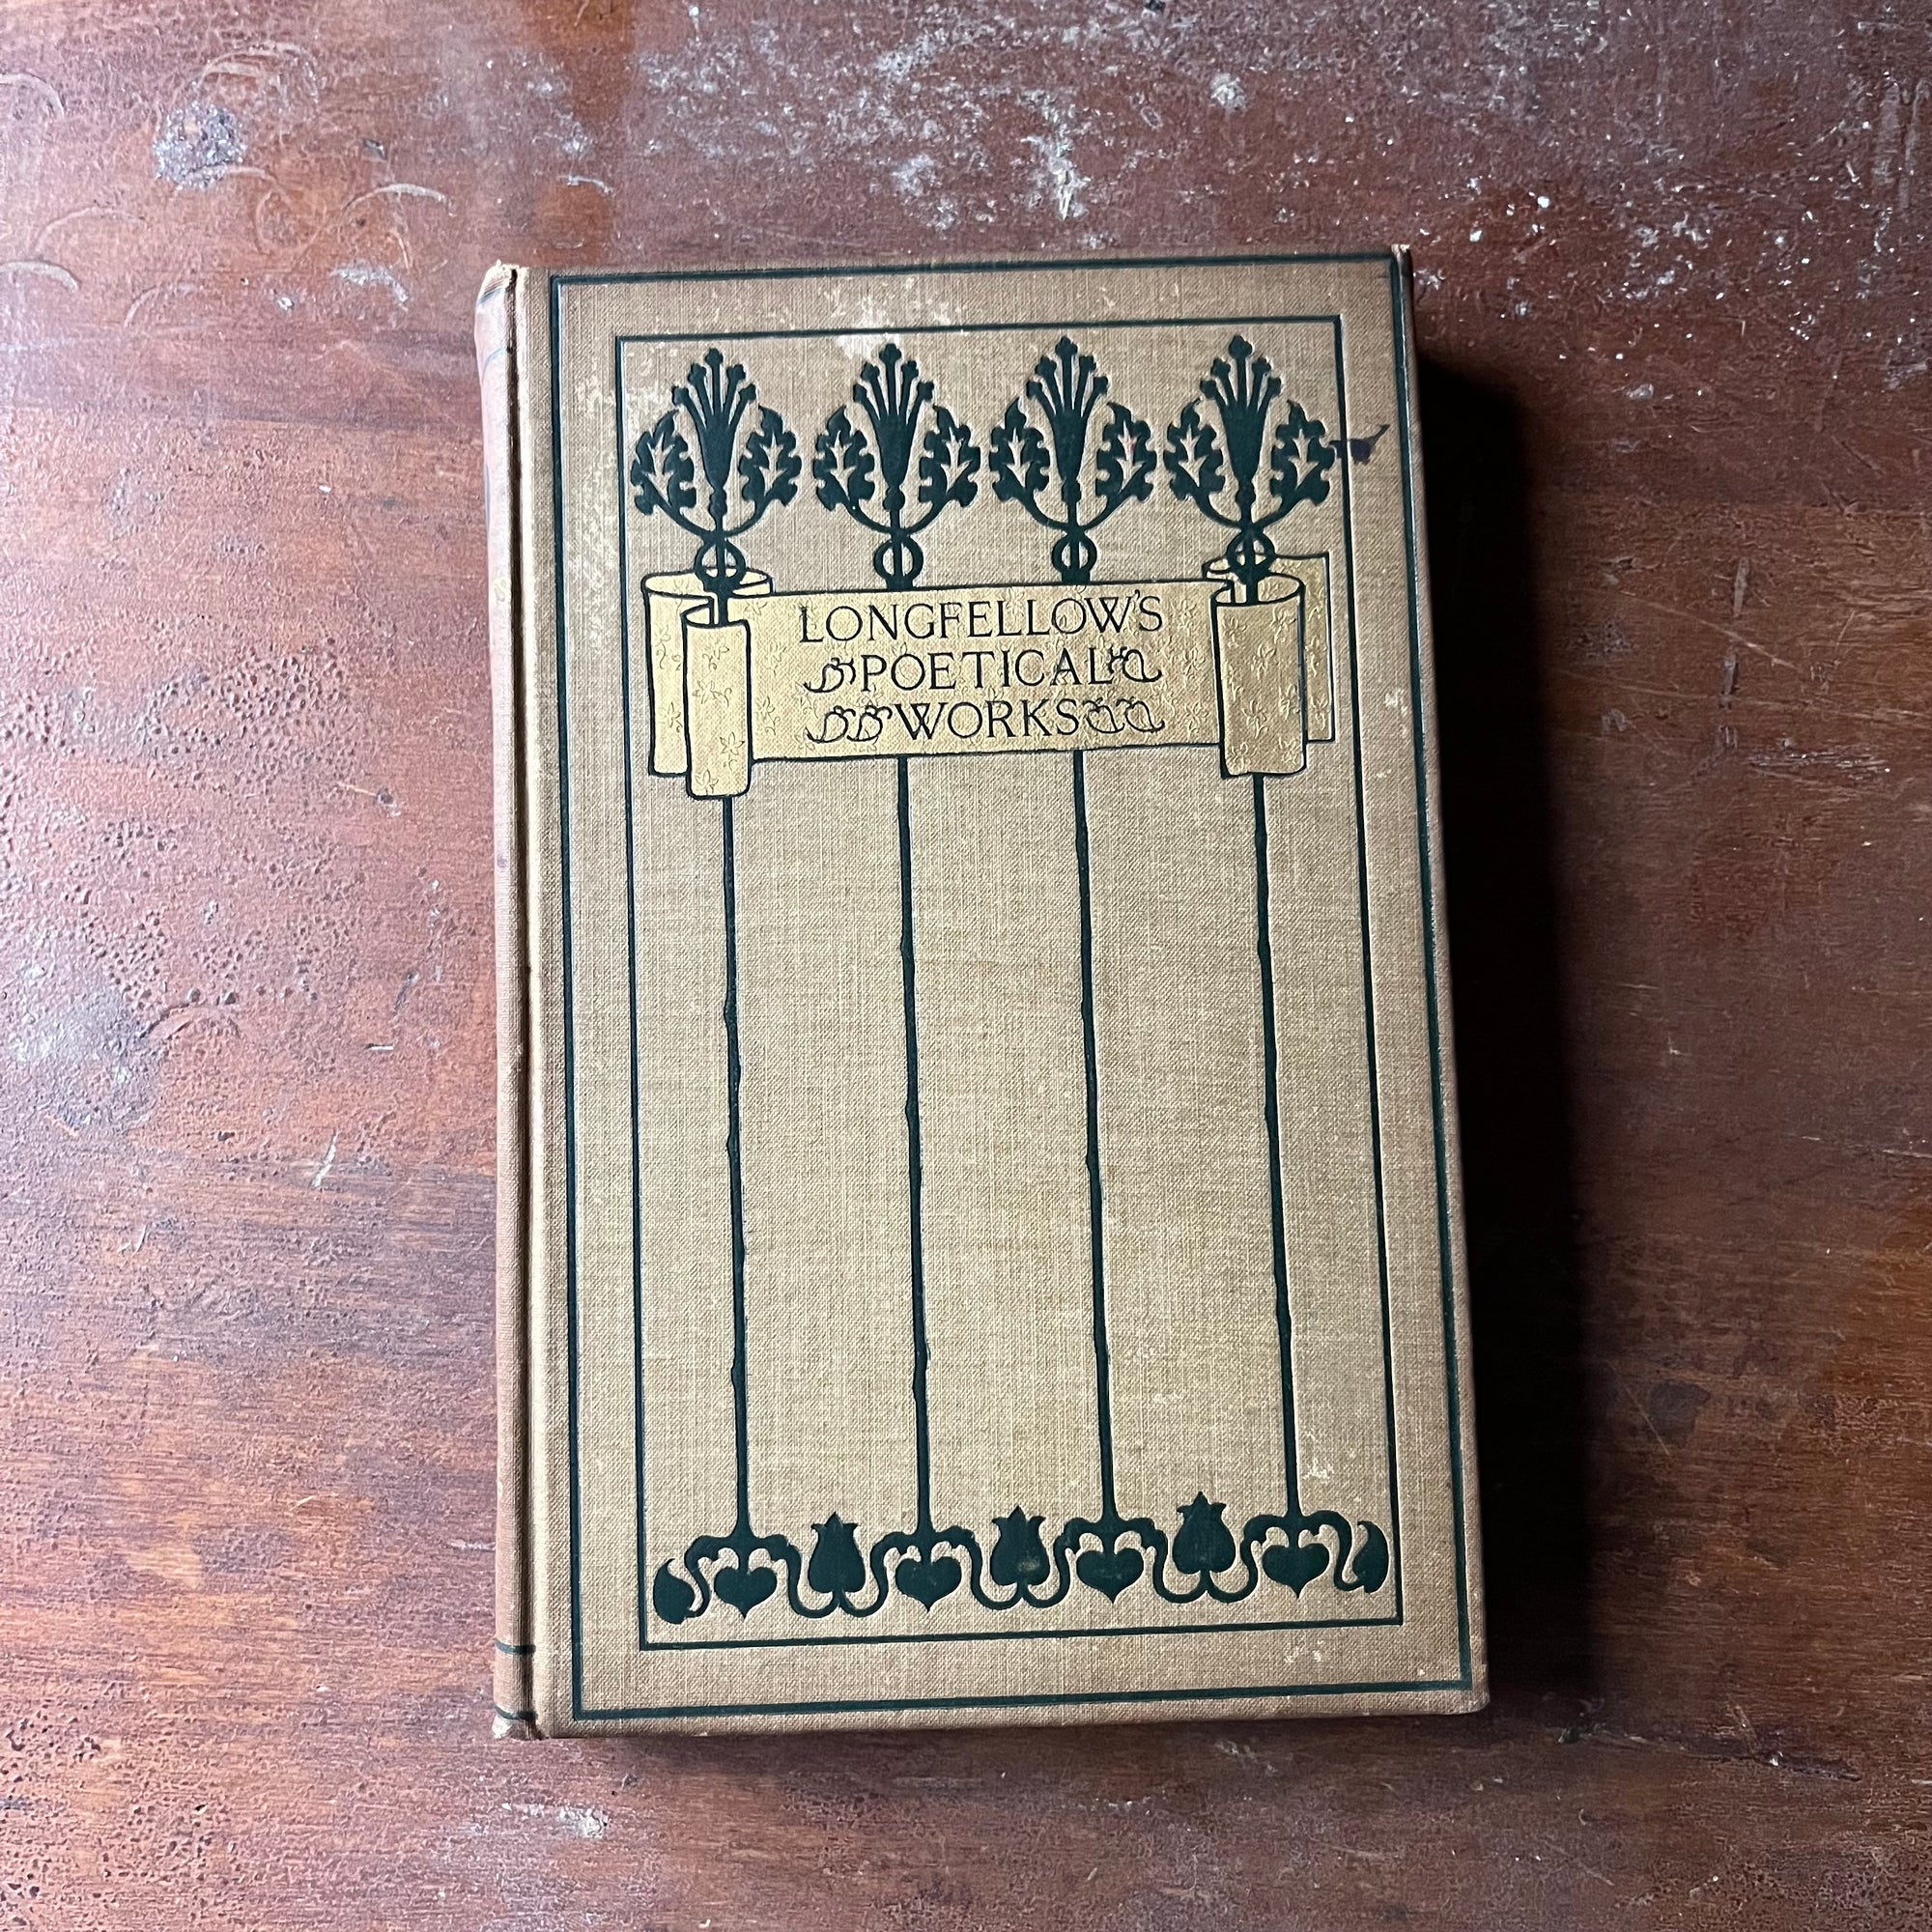 Longfellow's Political Works-The Poems of Henry Wadsworth Longfellow-antique poetry book-view of the decorative front cover with an art deco design & title written inside a gold scroll